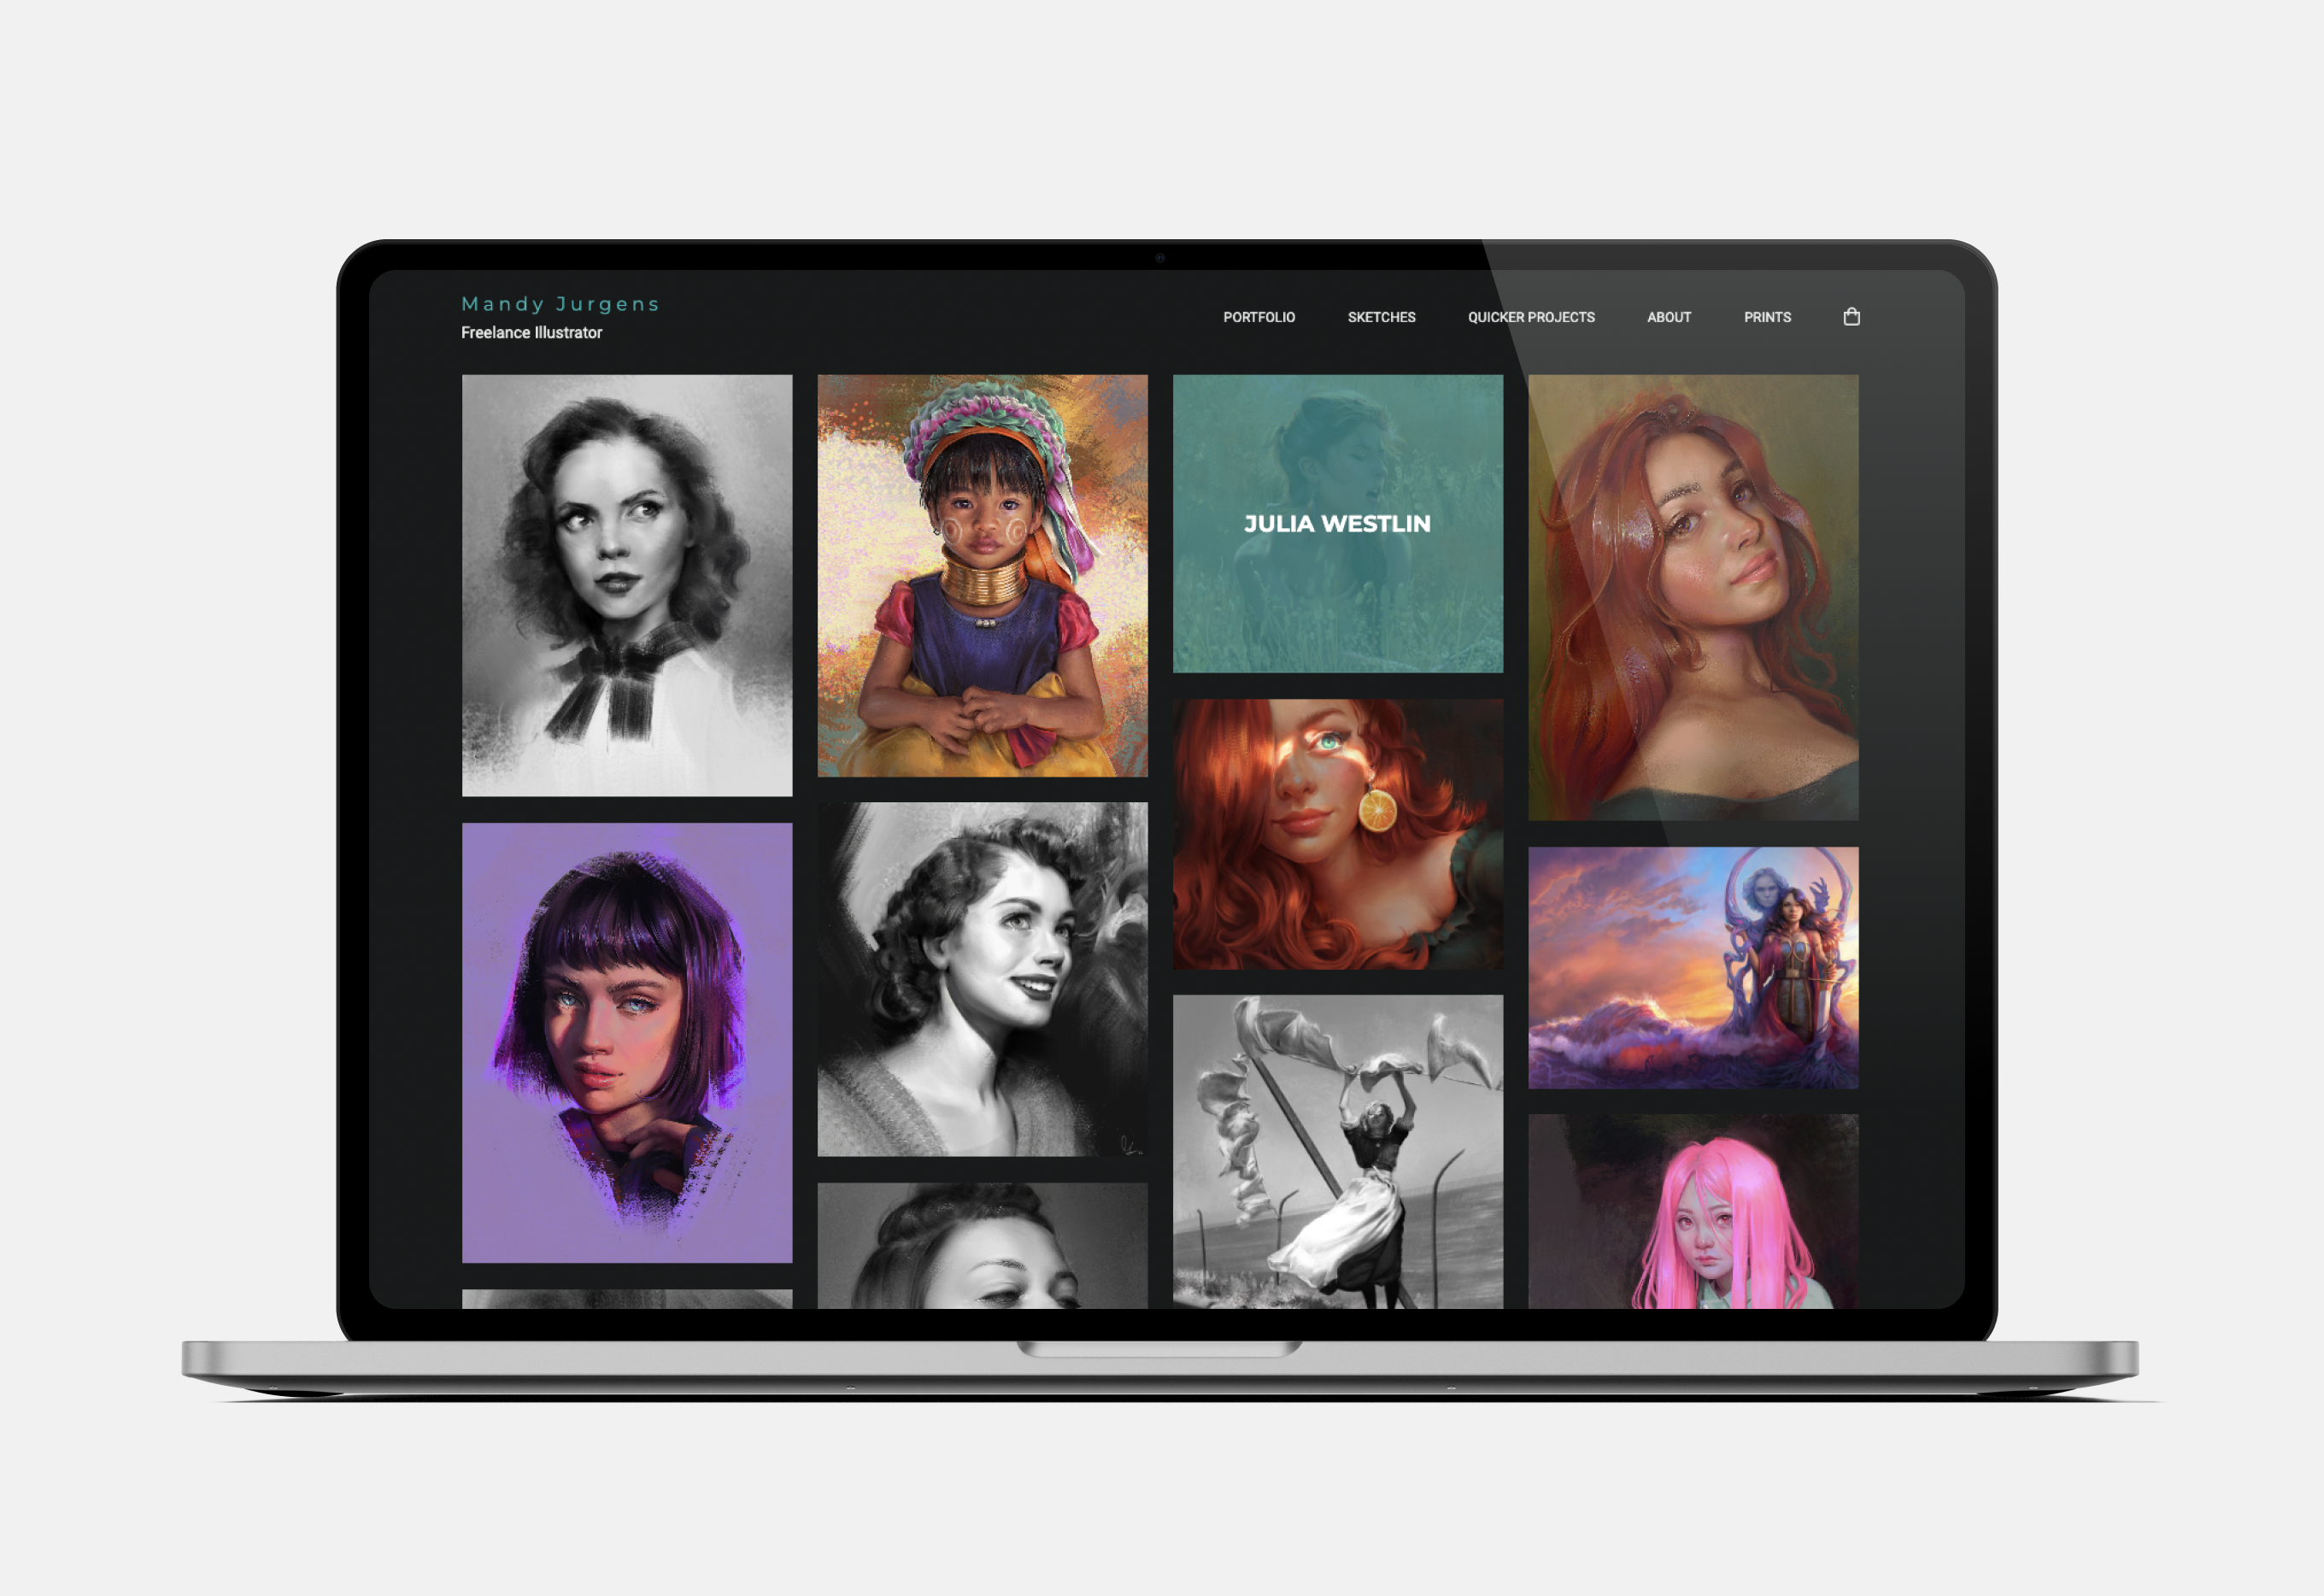 A webpage showing digital paintings of women in a grid view over a black background